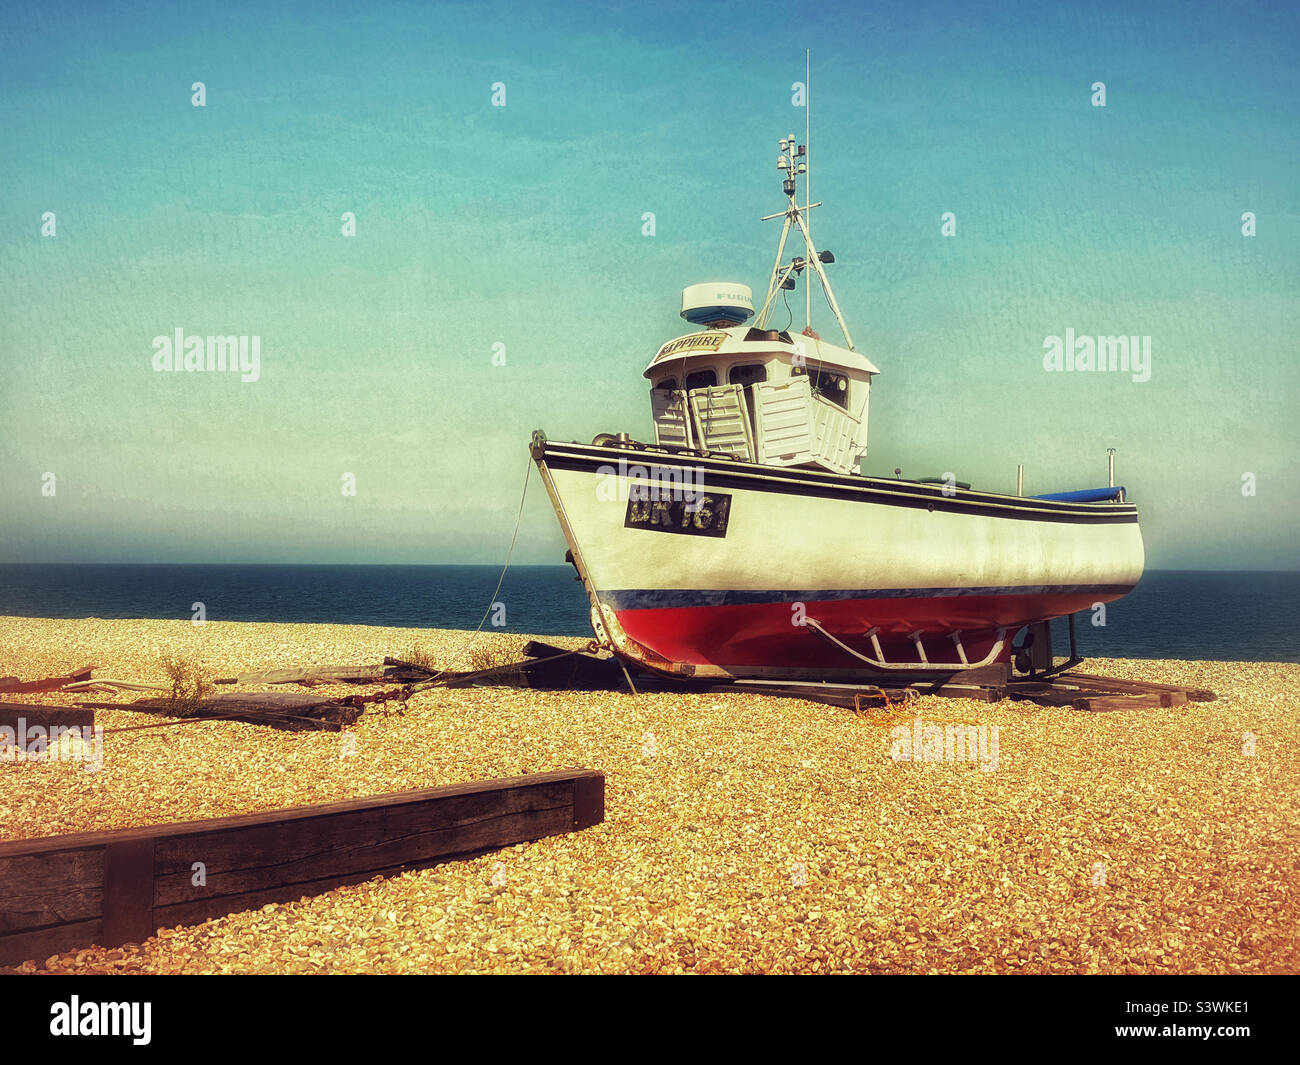 An old and abandoned fishing trawler lies on a pebble beach on the coastline of southern England. It’s summer and the sun is shining. A creative depiction of a coastal scene. Photo ©️ COLIN HOSKINS. Stock Photo